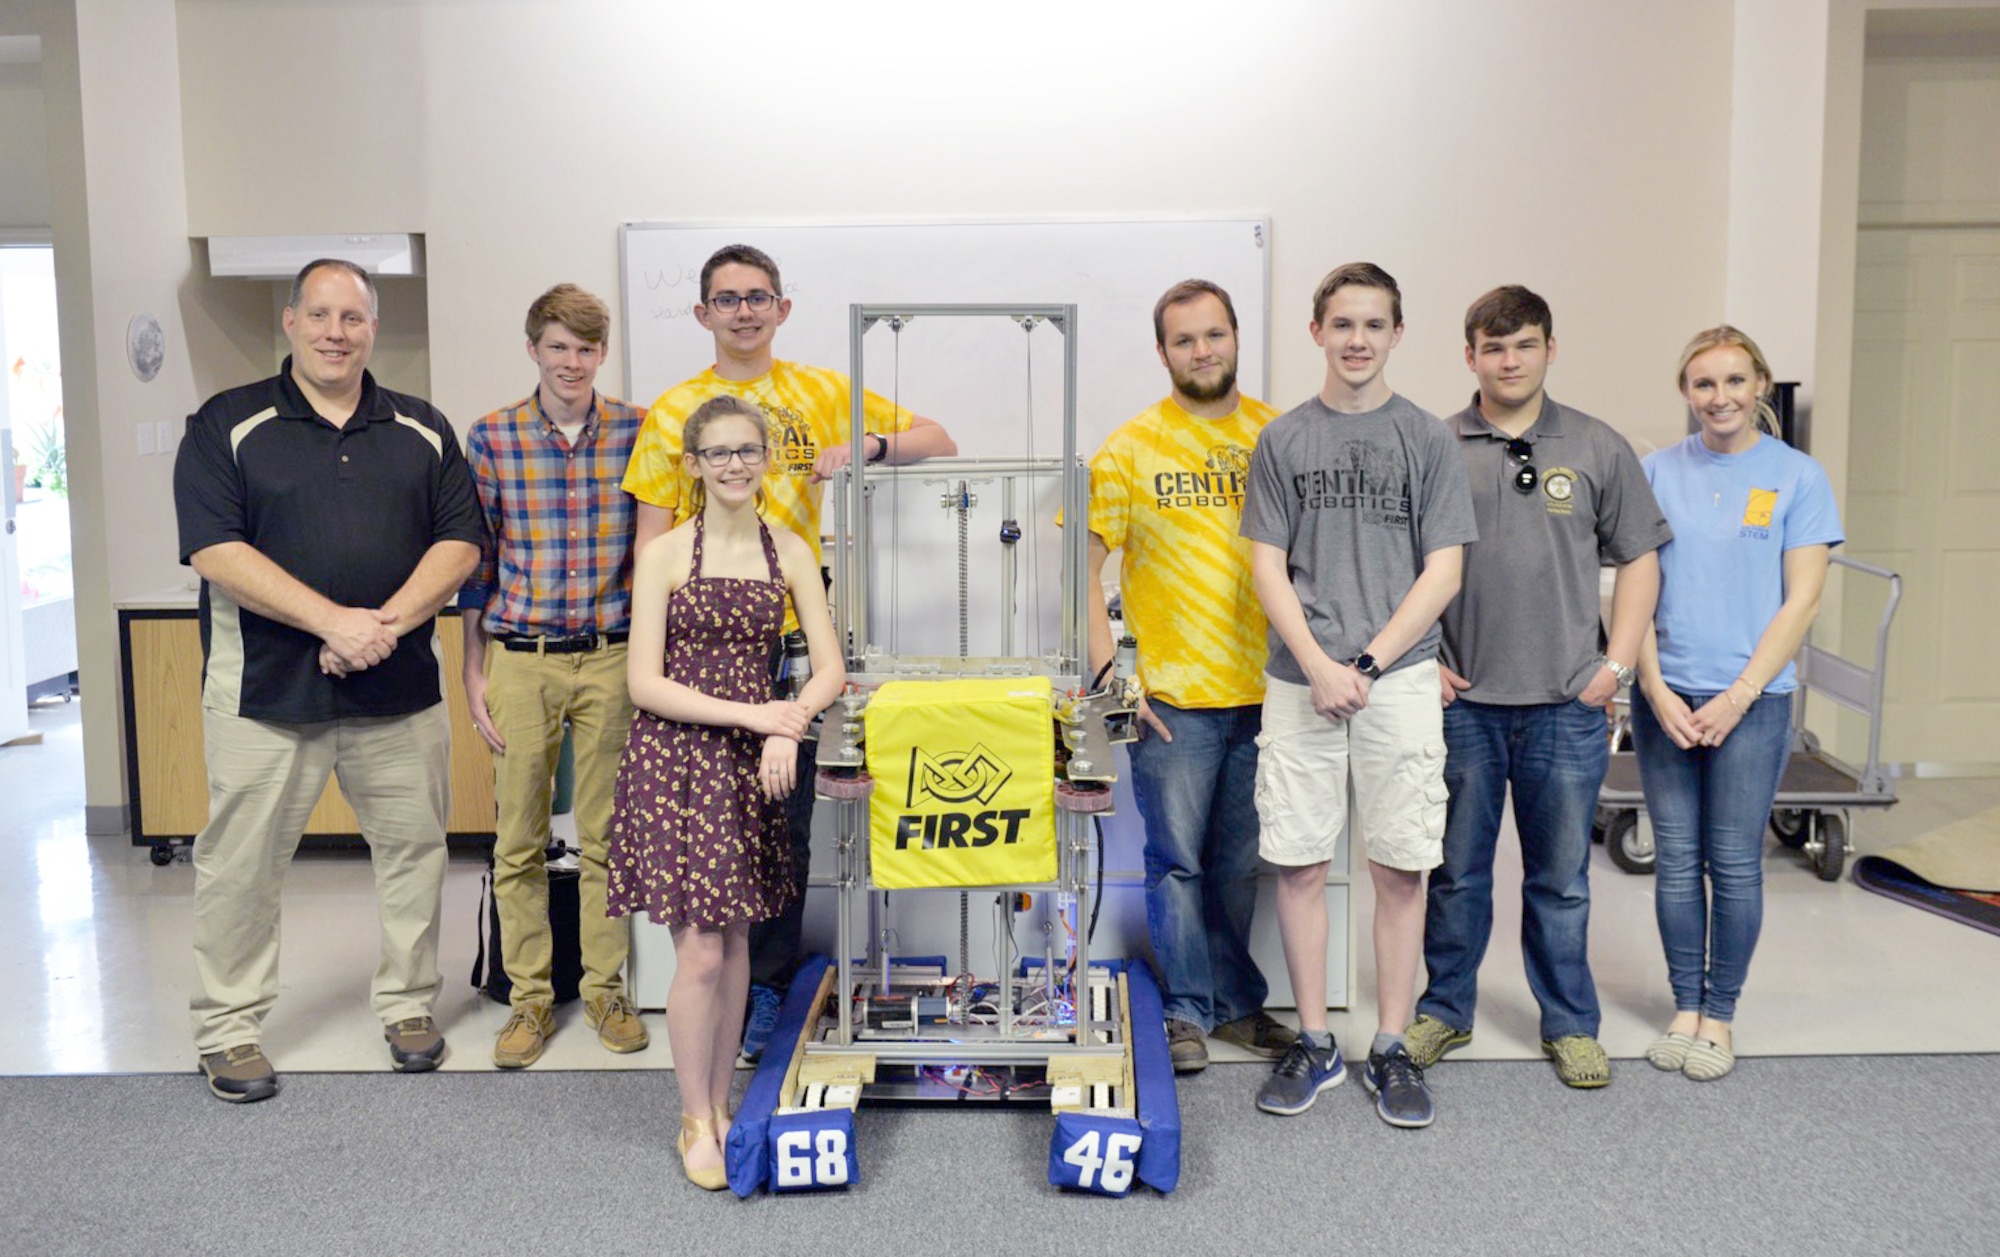 The Central Magnet Robotics team, with Central Magnet School in Murfreesboro, stopped in at the Hands-On Science Center (HOSC) in Tullahoma May 1 to provide a demonstration of their robot’s capabilities for Air Force STEM director Olga Oakley. Pictured left to right: Marc Guthrie, Drew Dove, Ethan Davenport, Maddy Perrien, Aidan Gibson, David Schafer, Jimmy Jones and Olga Oakley. (U.S. Air Force photo/Christopher Warner)